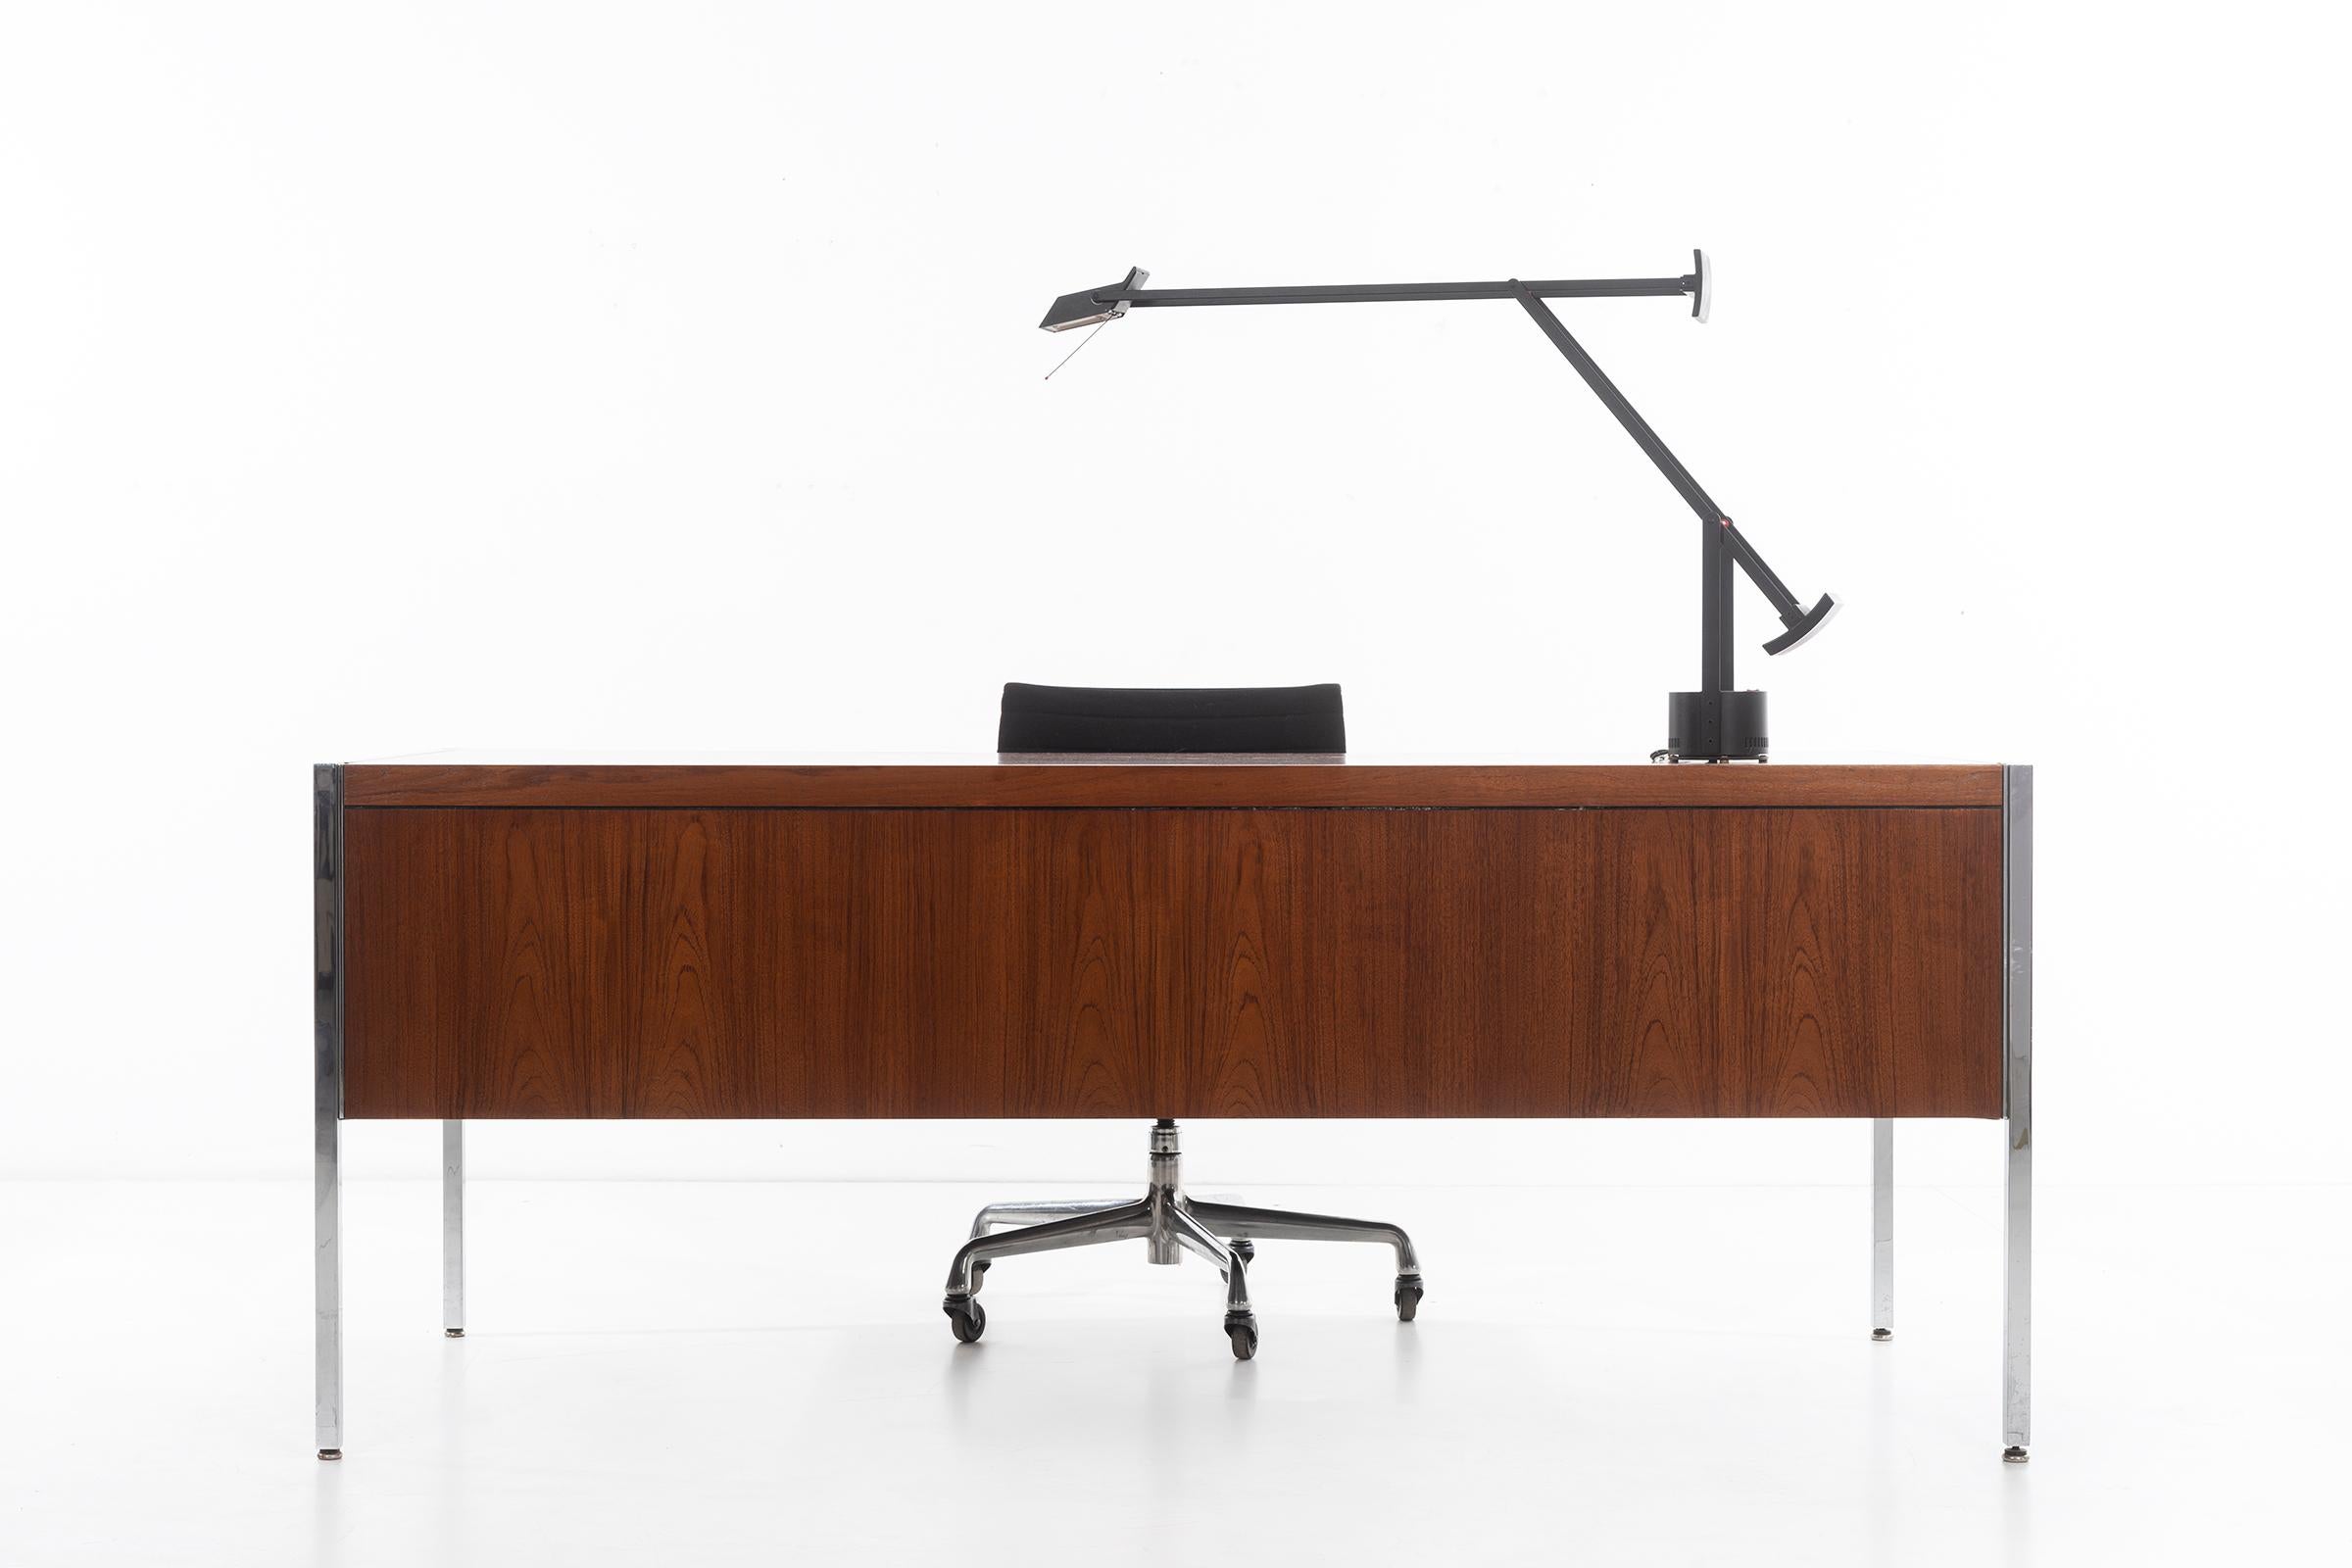 Schultz for Knoll teak wood desk, features 2 drawers and one file drawer with a left and right pull-out writing surface.
Solid chrome-plated uprights with inlaid chrome design detailed top.
Knoll International label on underside.